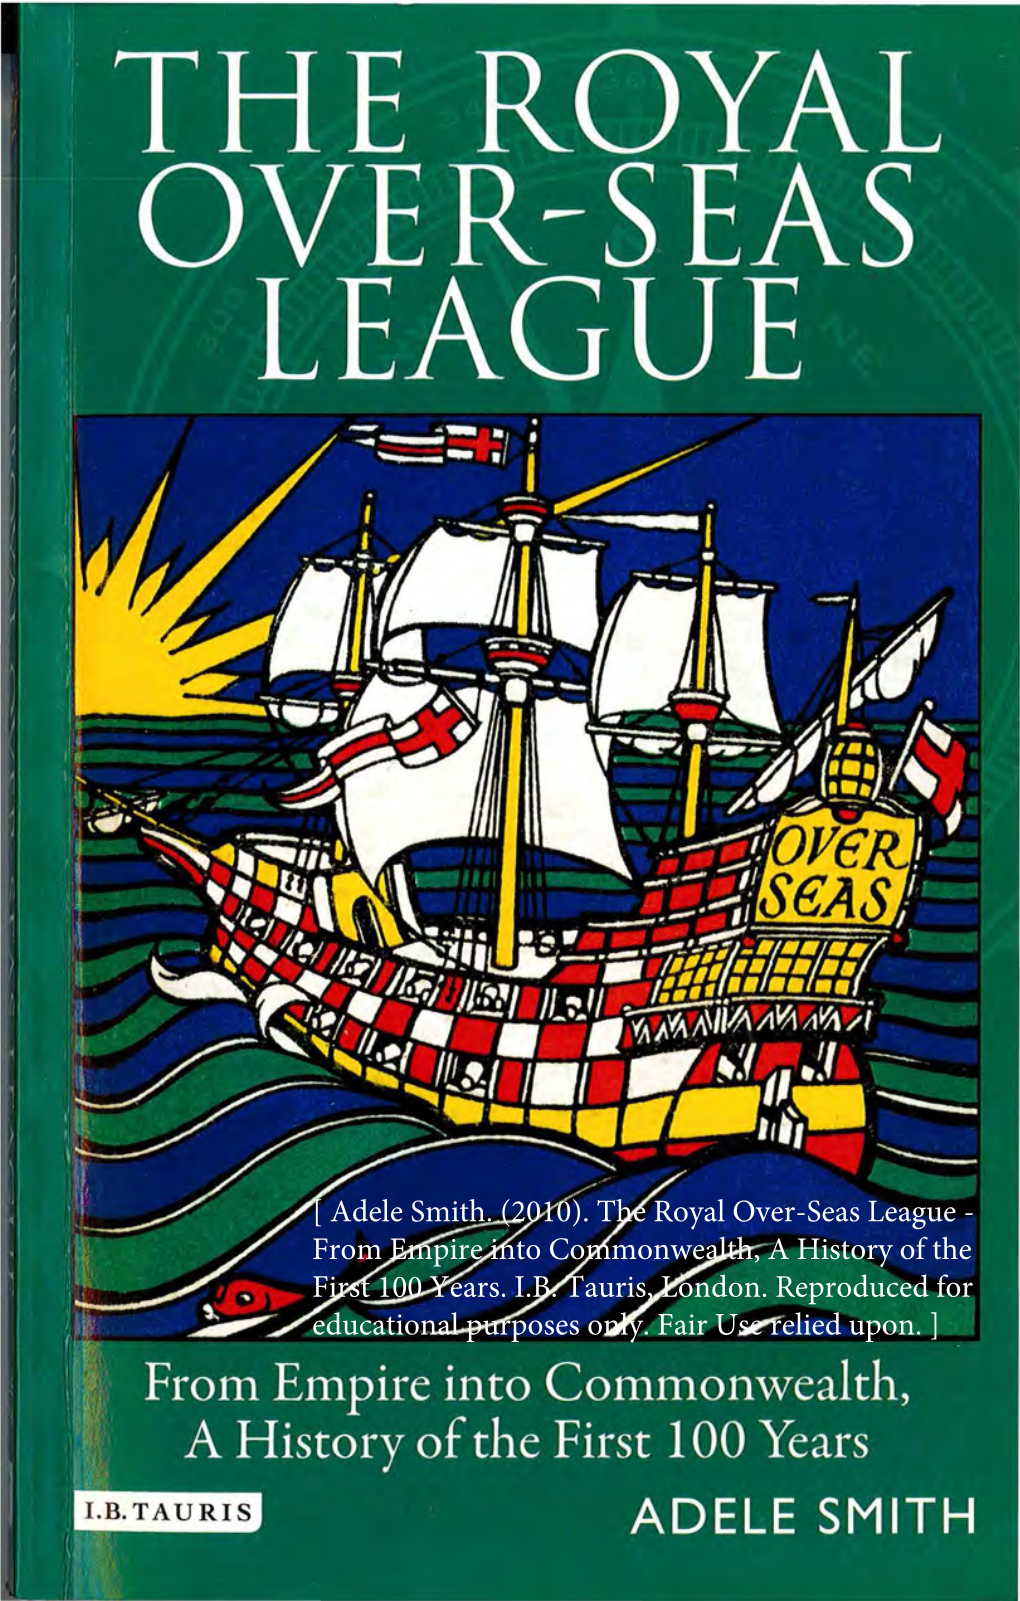 [ Adele Smith. (2010). the Royal Over-Seas League - from Empire Into Commonwealth, a History of the First 100 Years